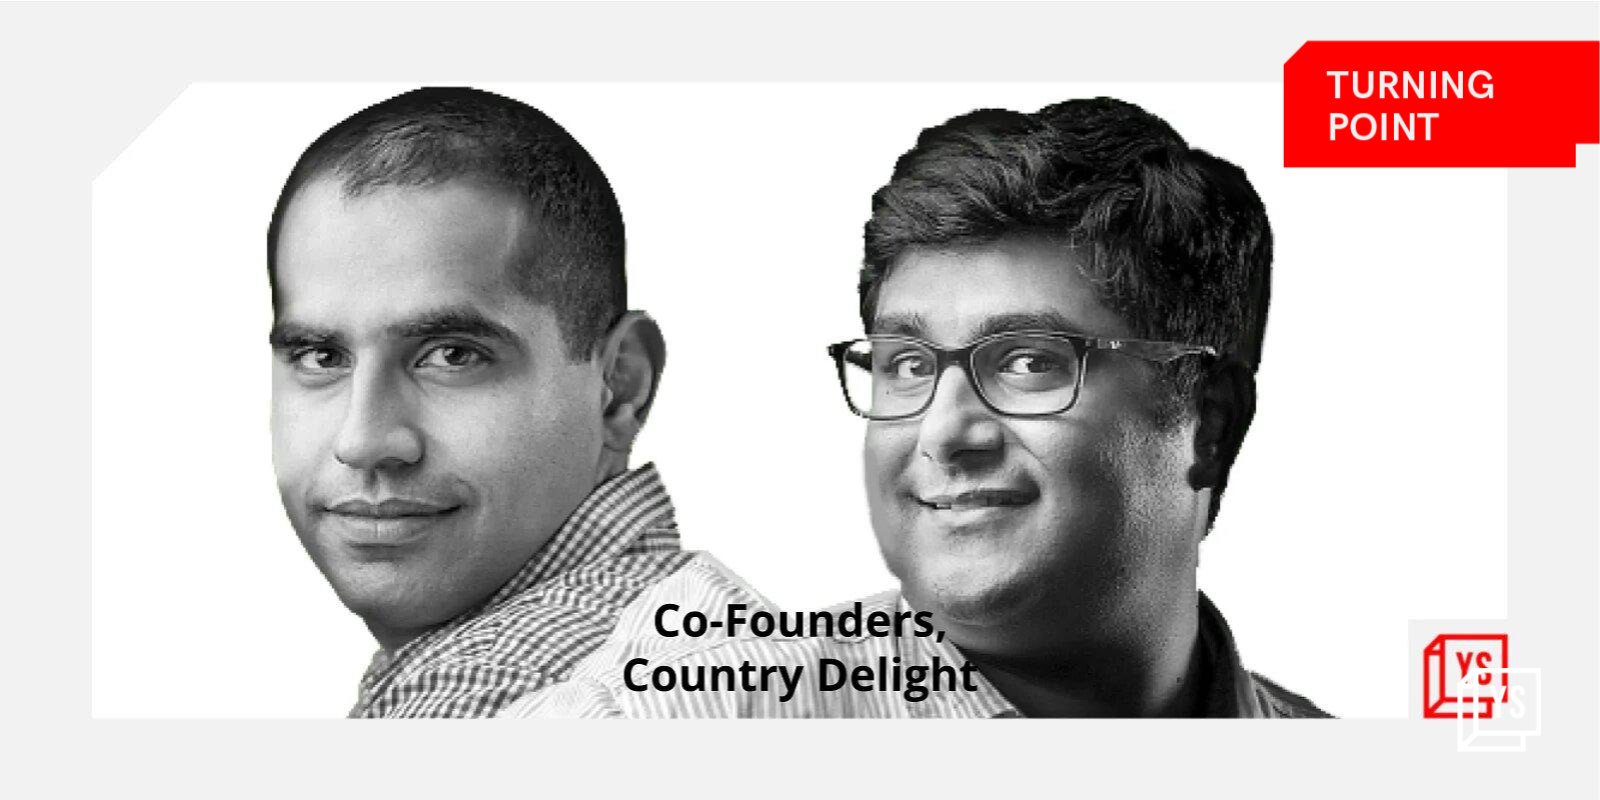 What led these founders to launch D2C milk and grocery delivery startup Country Delight